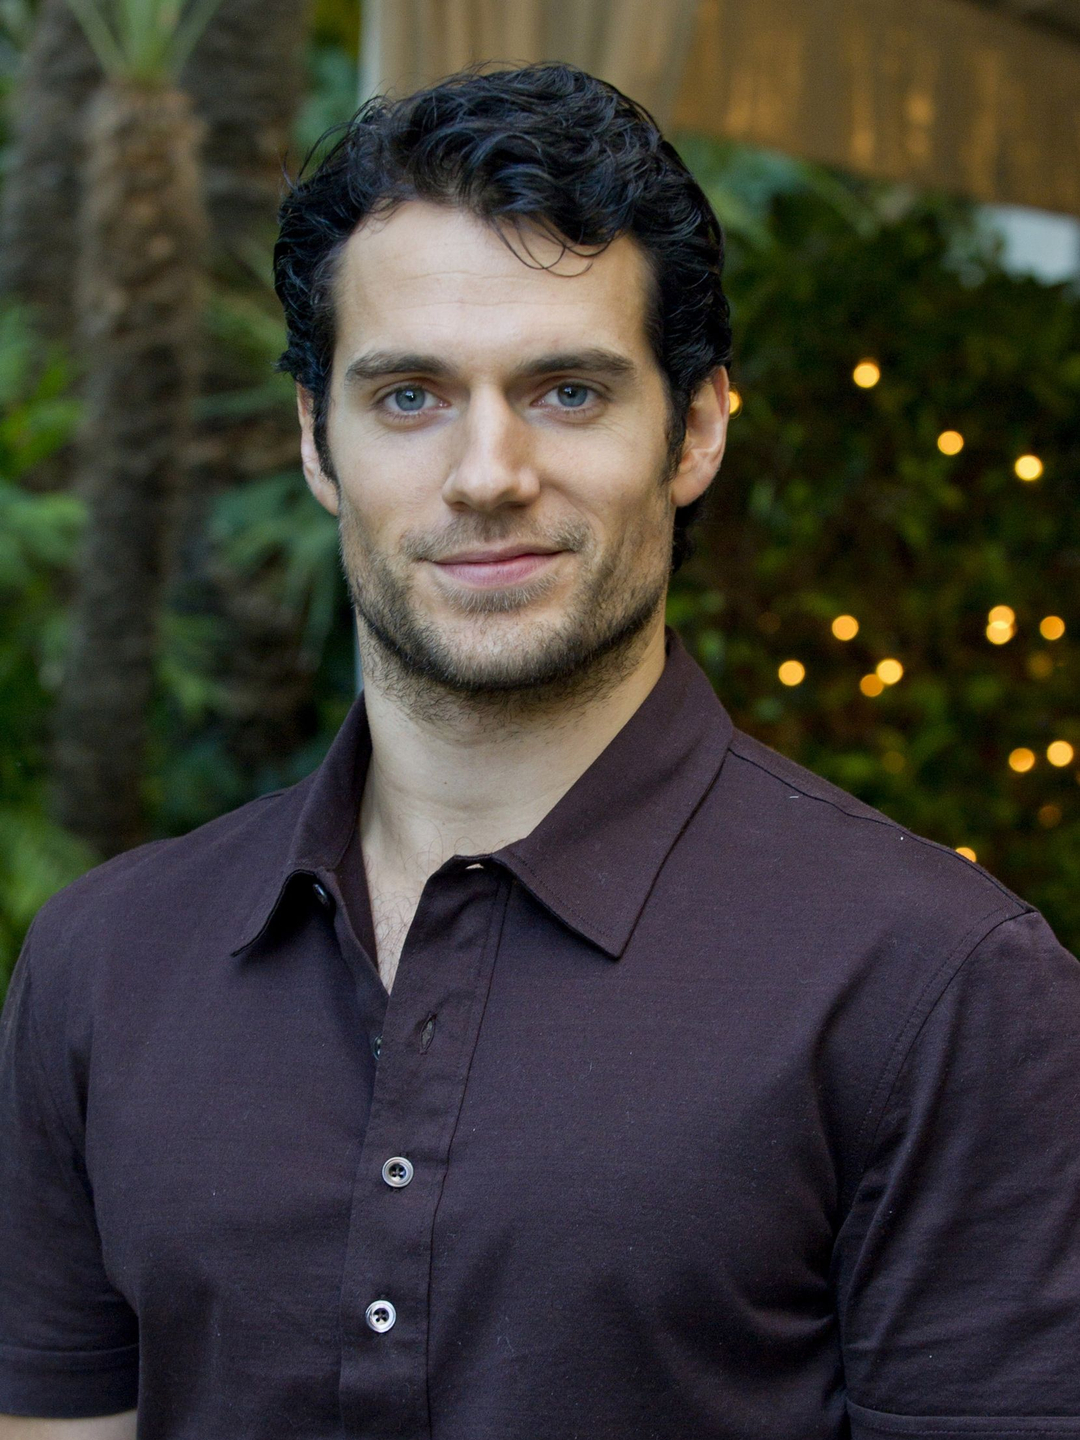 Henry Cavill how did he became famous